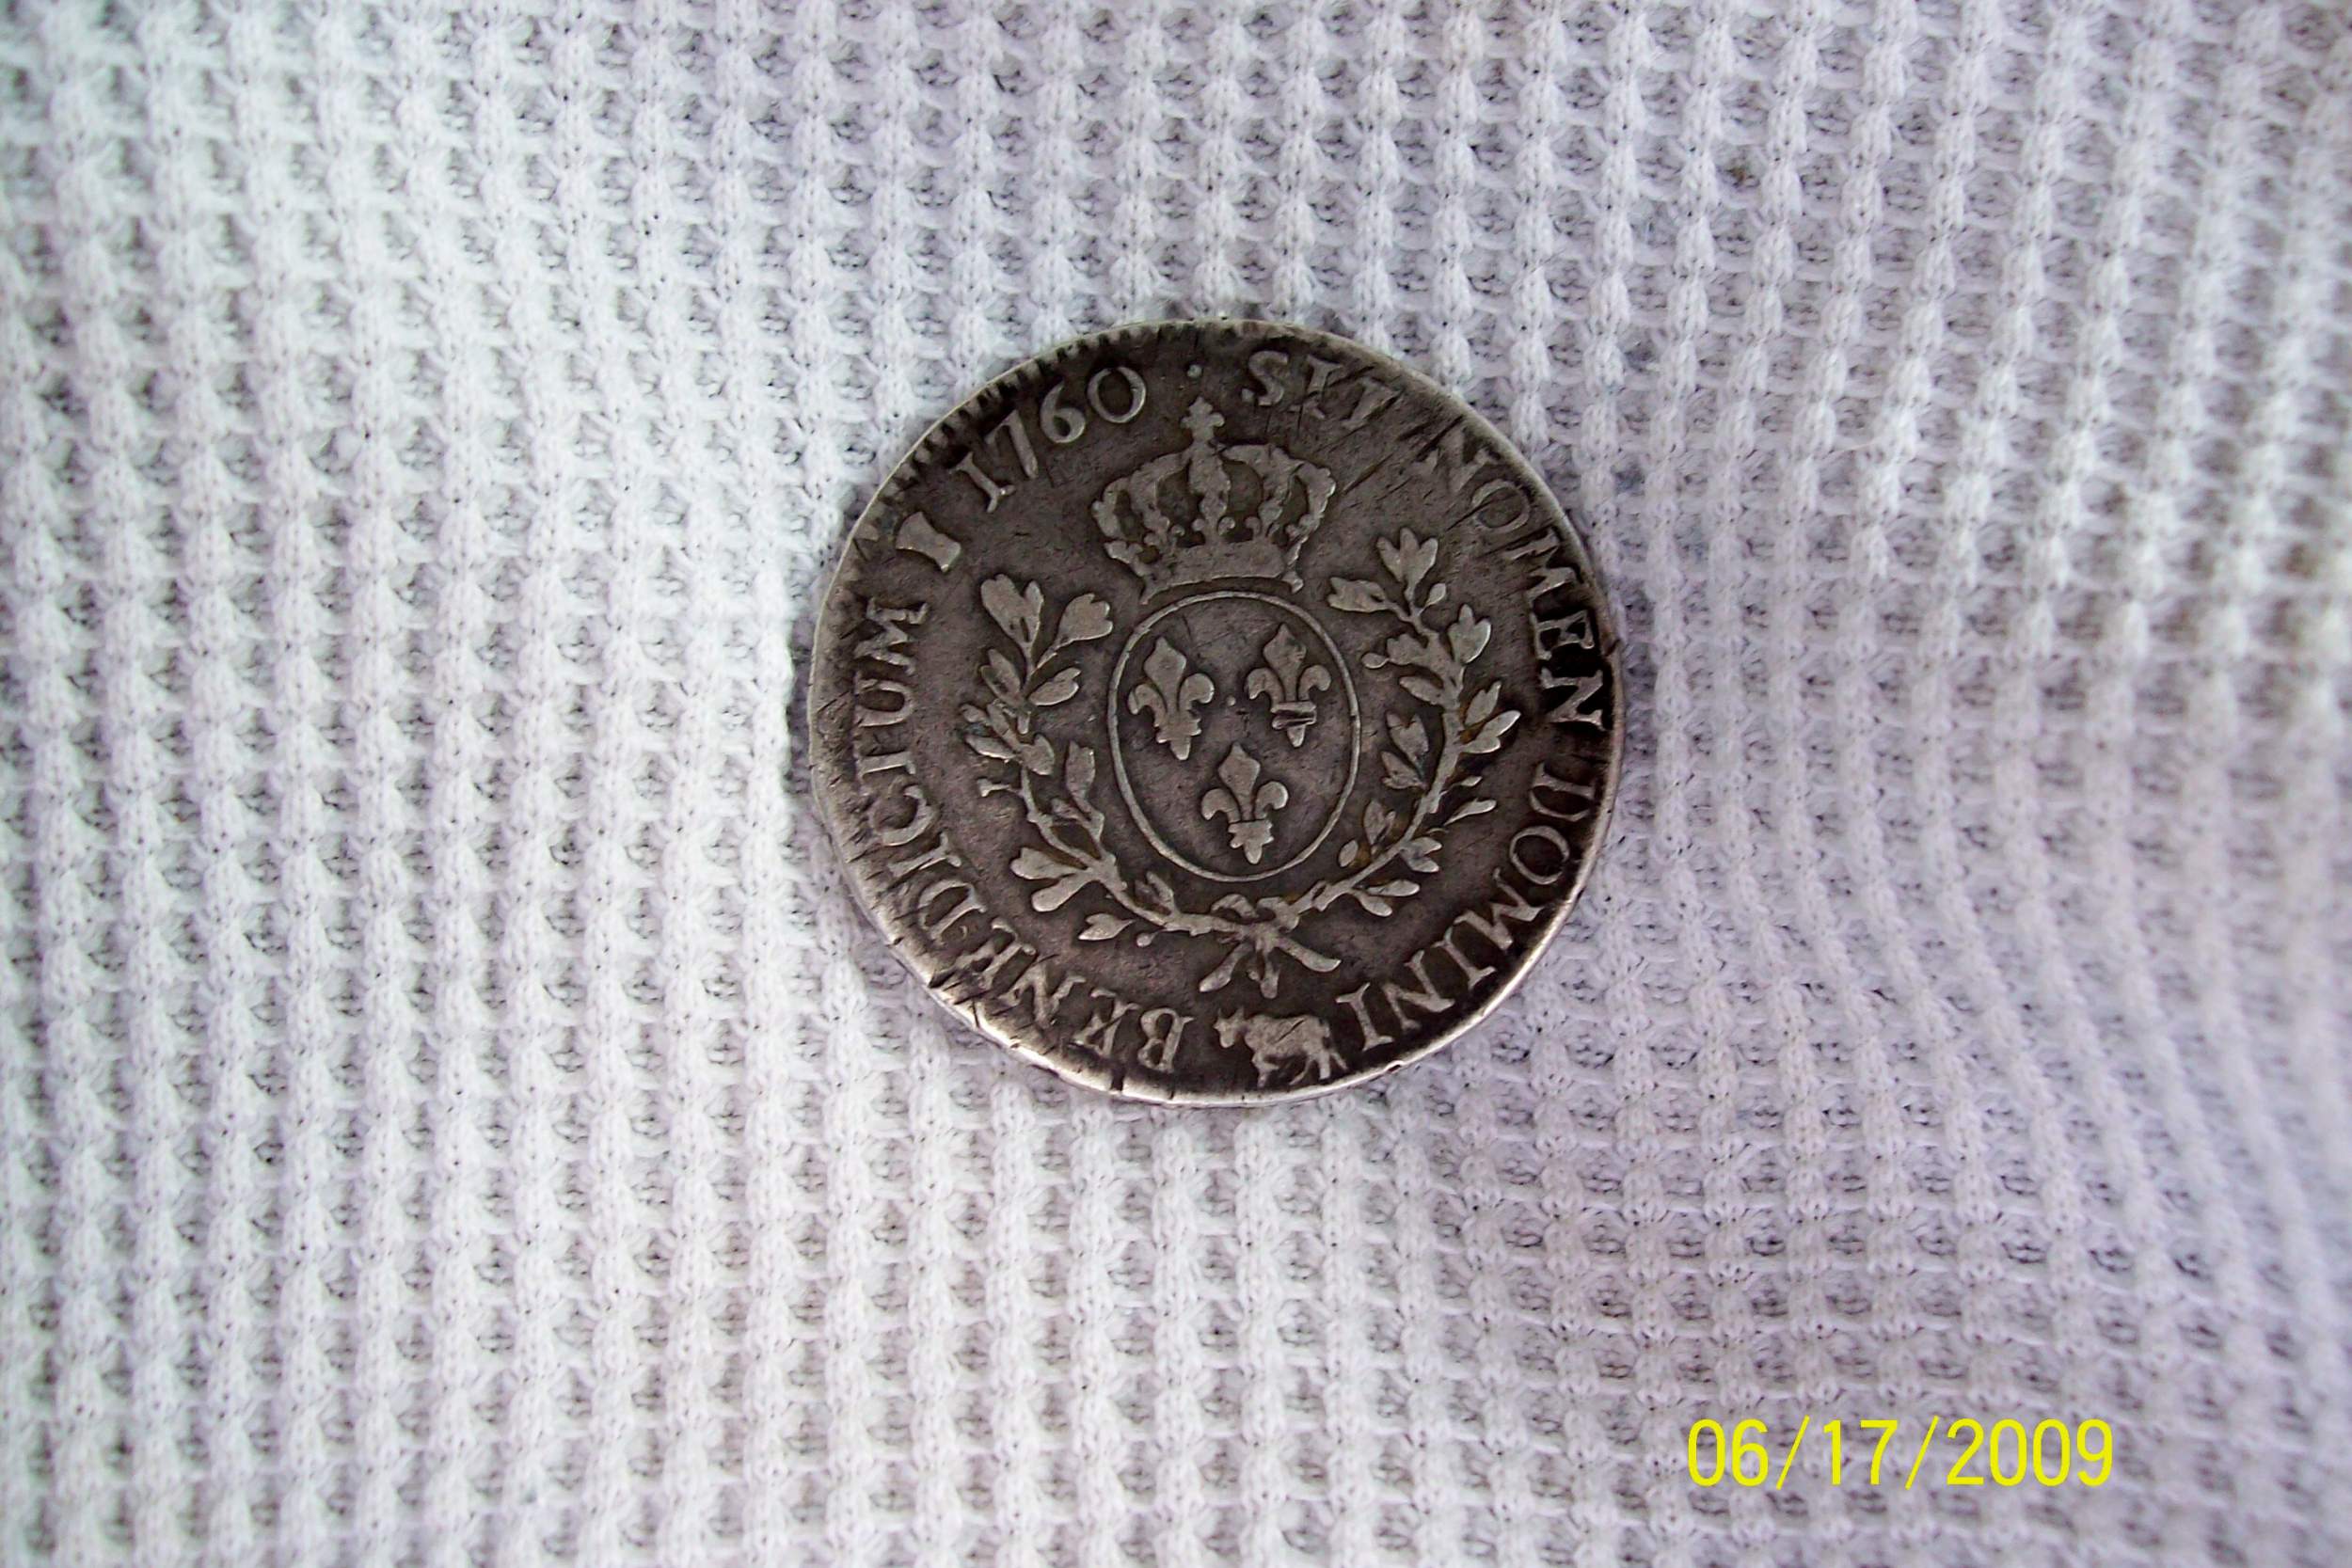 Reverse of 1760 coin i found it 8 inches deep - Iam not sure if this was minted in Canada ? its much bigger then a US silver dollar